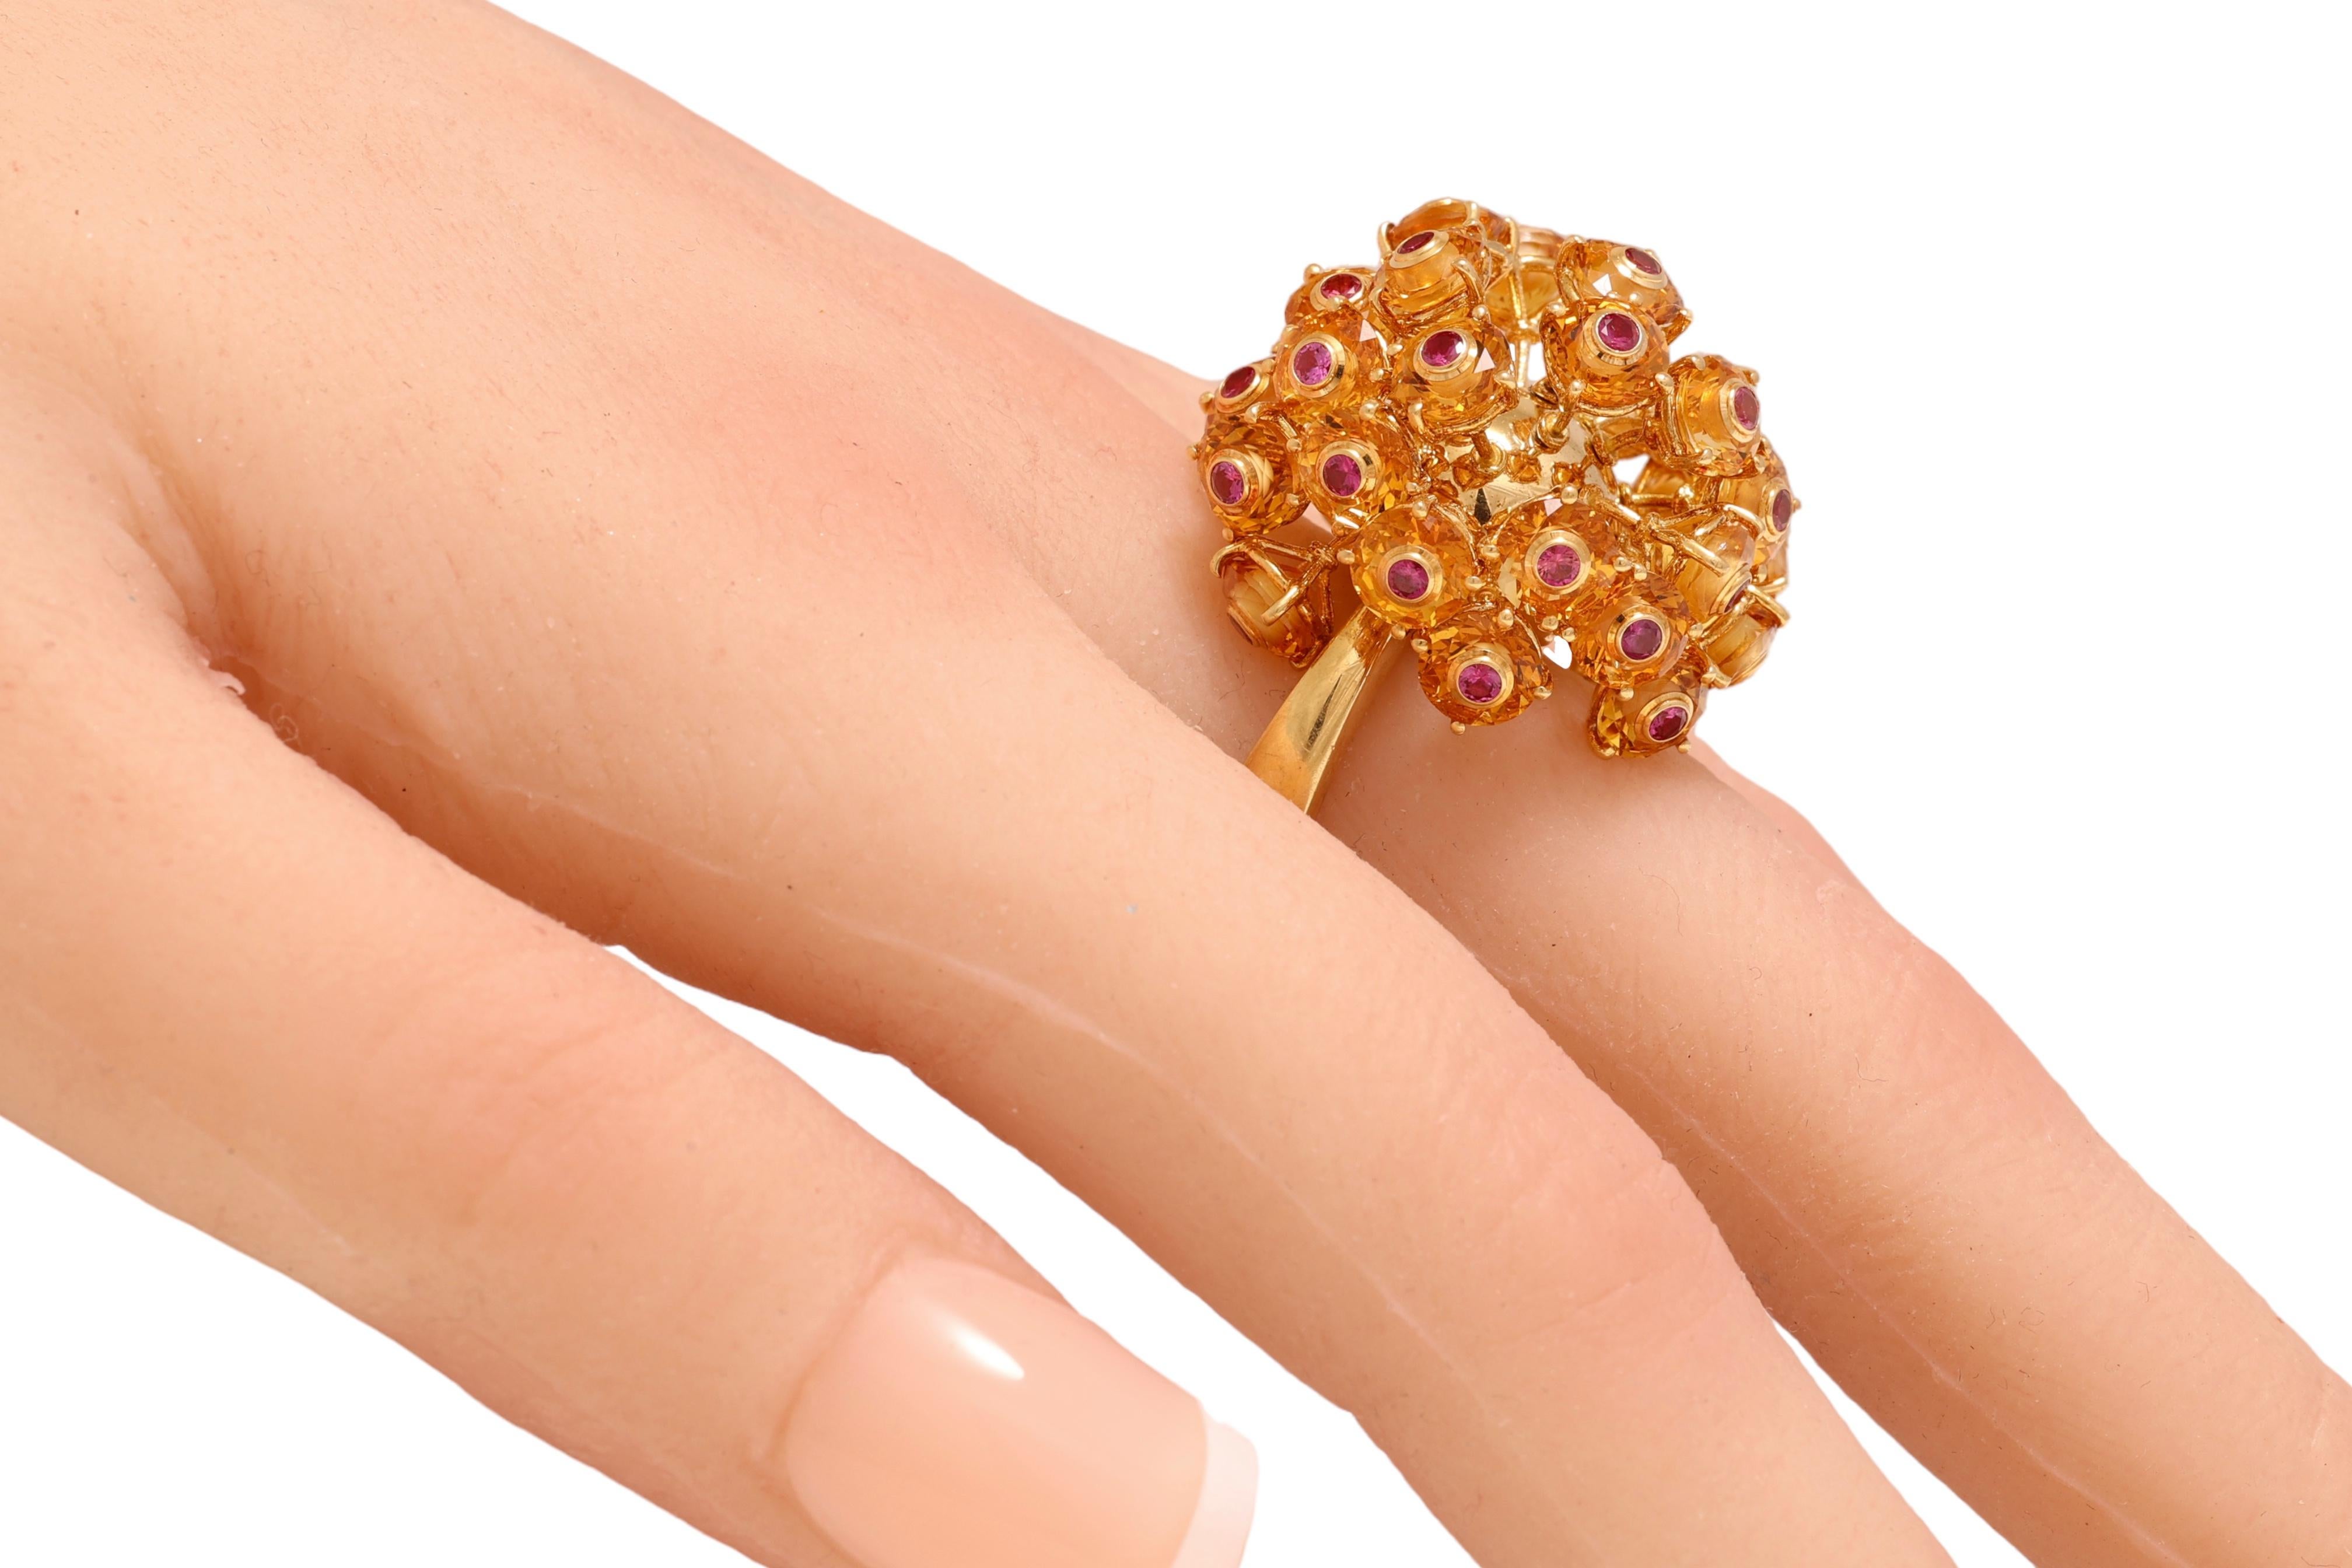  18 kt. Yellow Gold Ball of Moving 1.65 ct. Rubies and Citrine For Sale 1